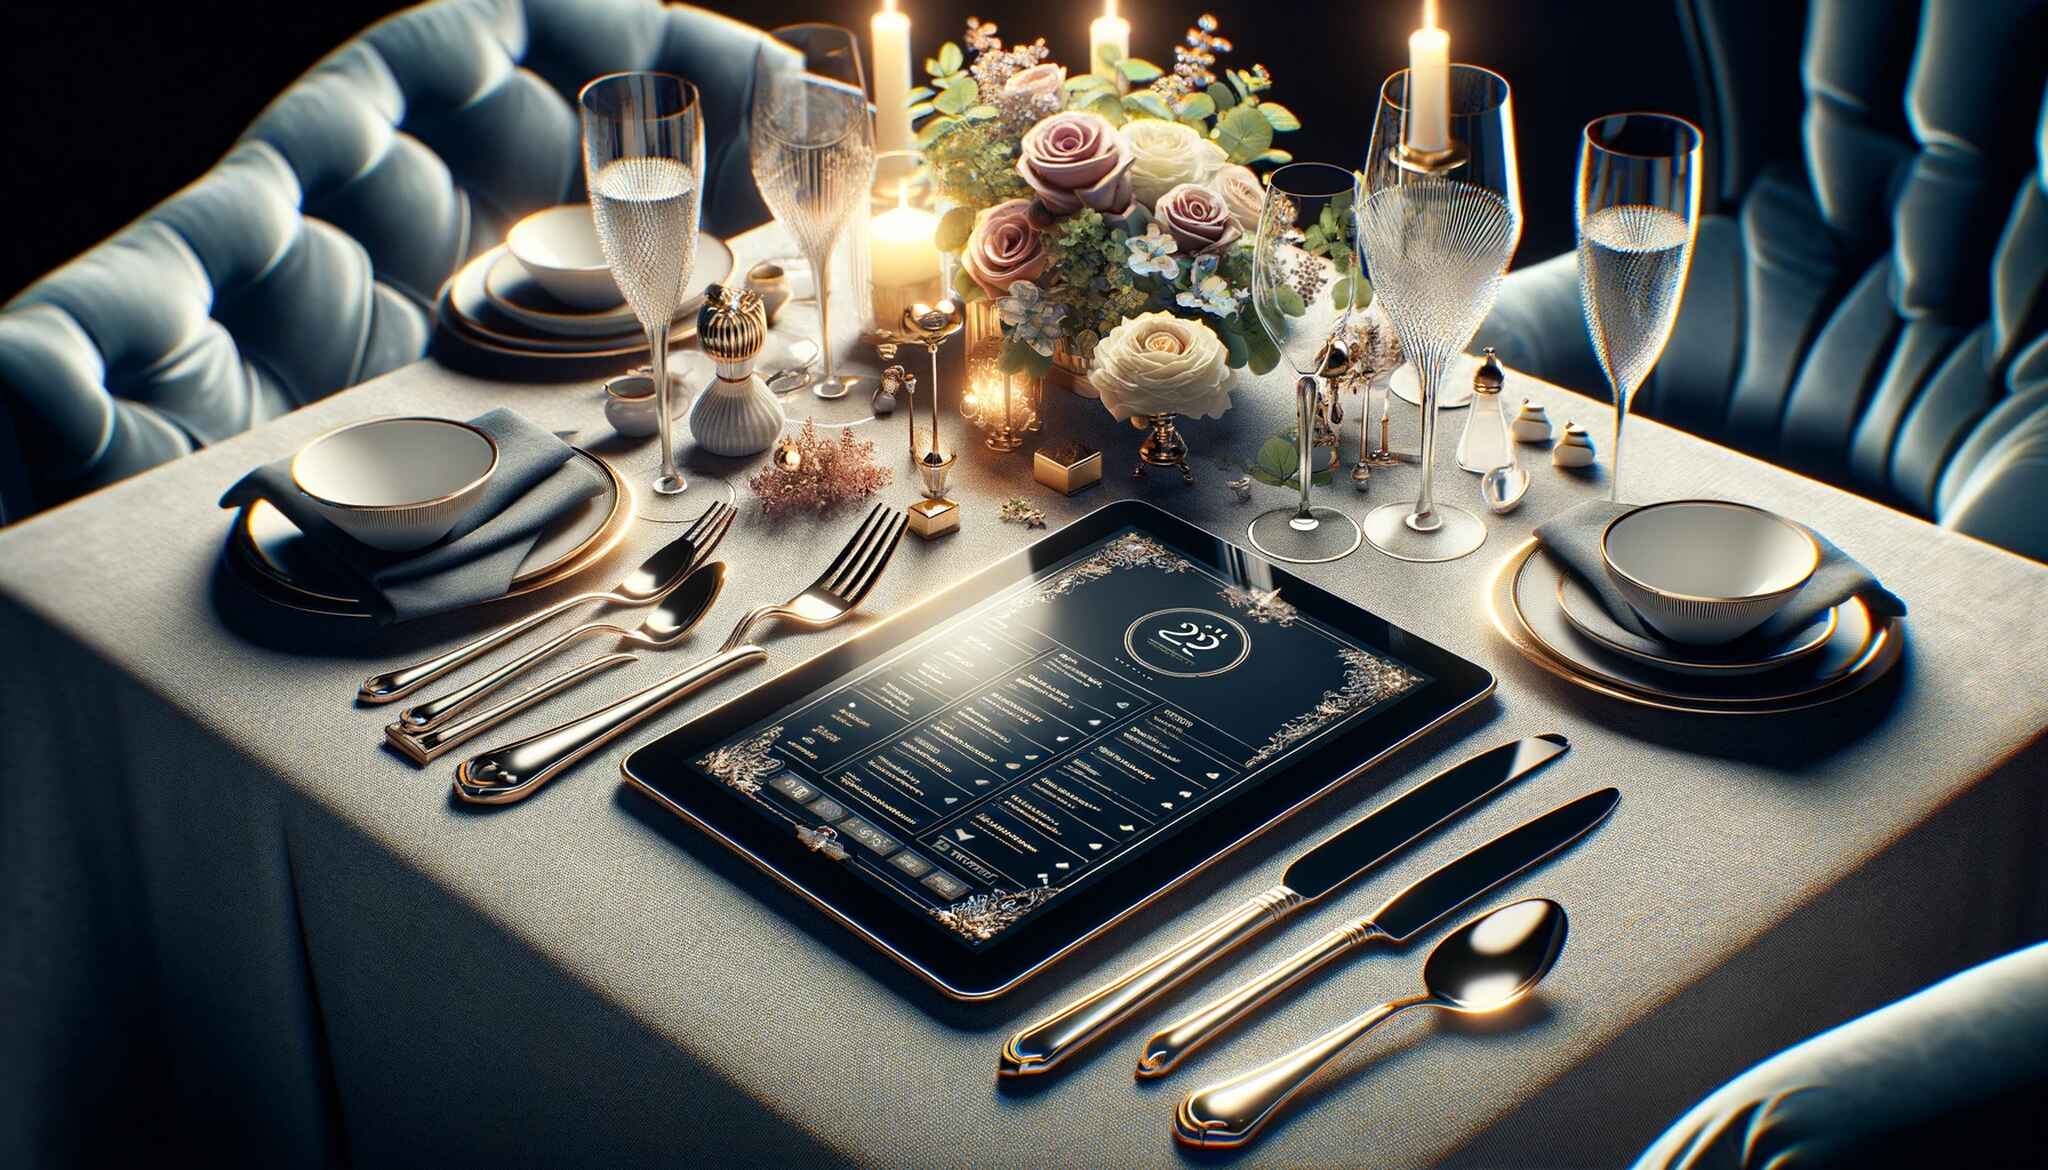 An elegant restaurant table setting featuring a digital tablet as a menu, surrounded by fine dining elements like stylish cutlery, elegant glassware